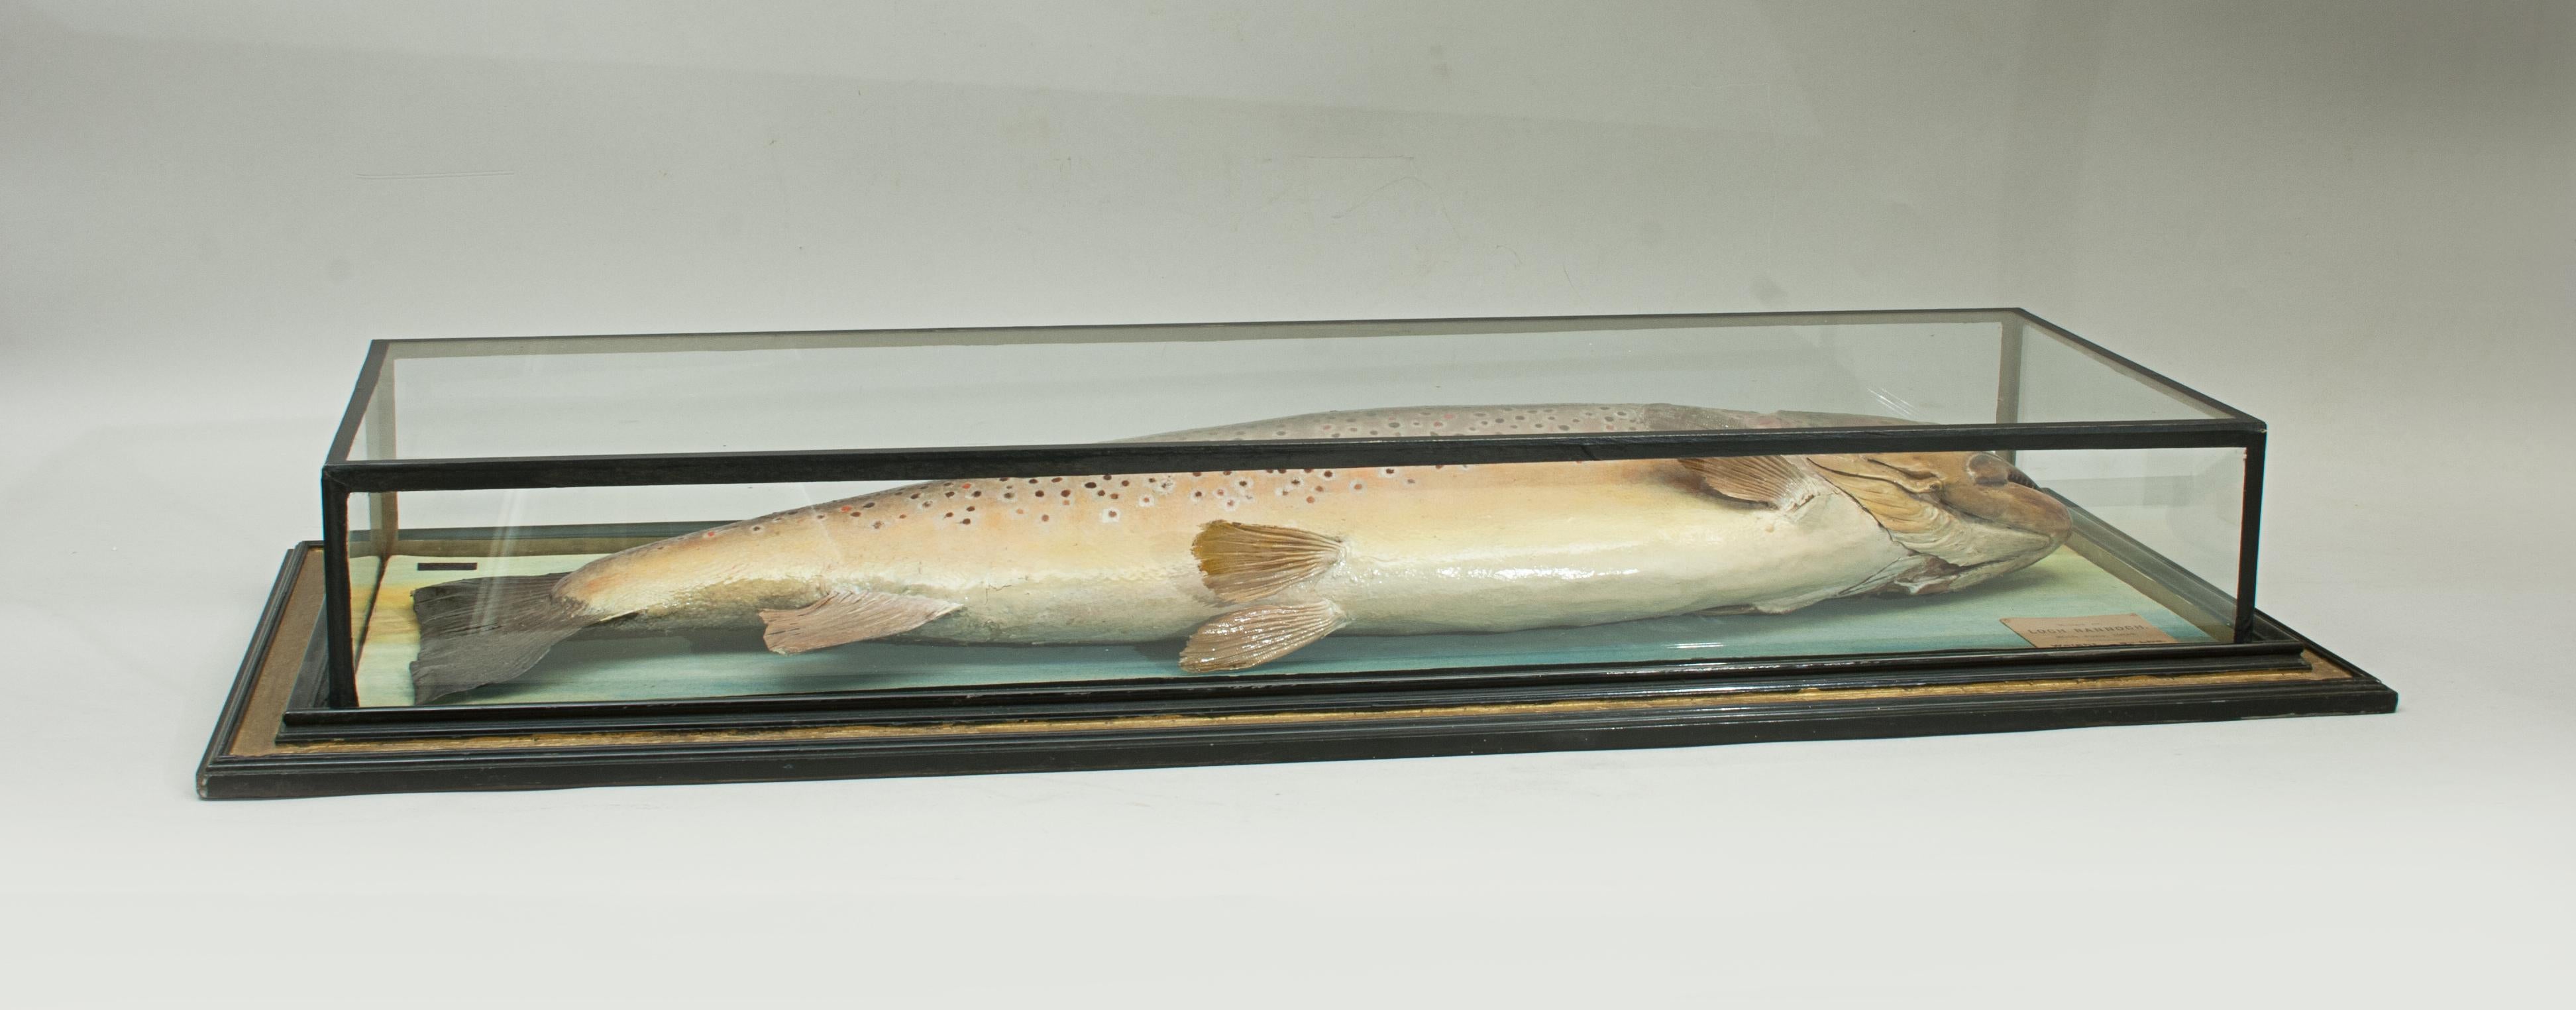 Animal Skin Antique Trophy Fish Model of a Brown Trout by Malloch of Perth